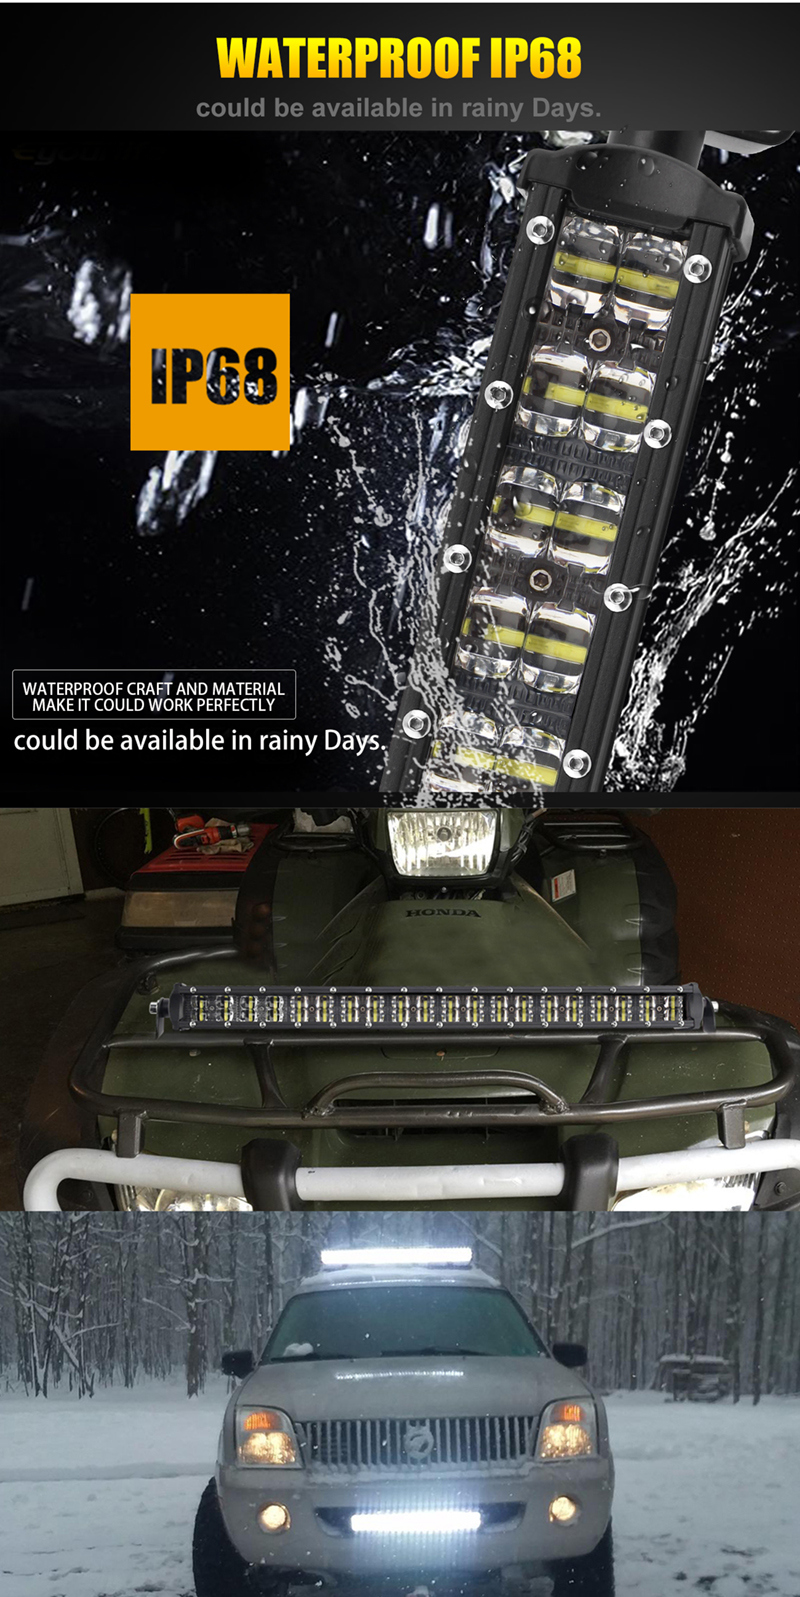 Factory Direct Selling Dual Row 6D IP68 4X4 off Road 22inch LED Light Bar